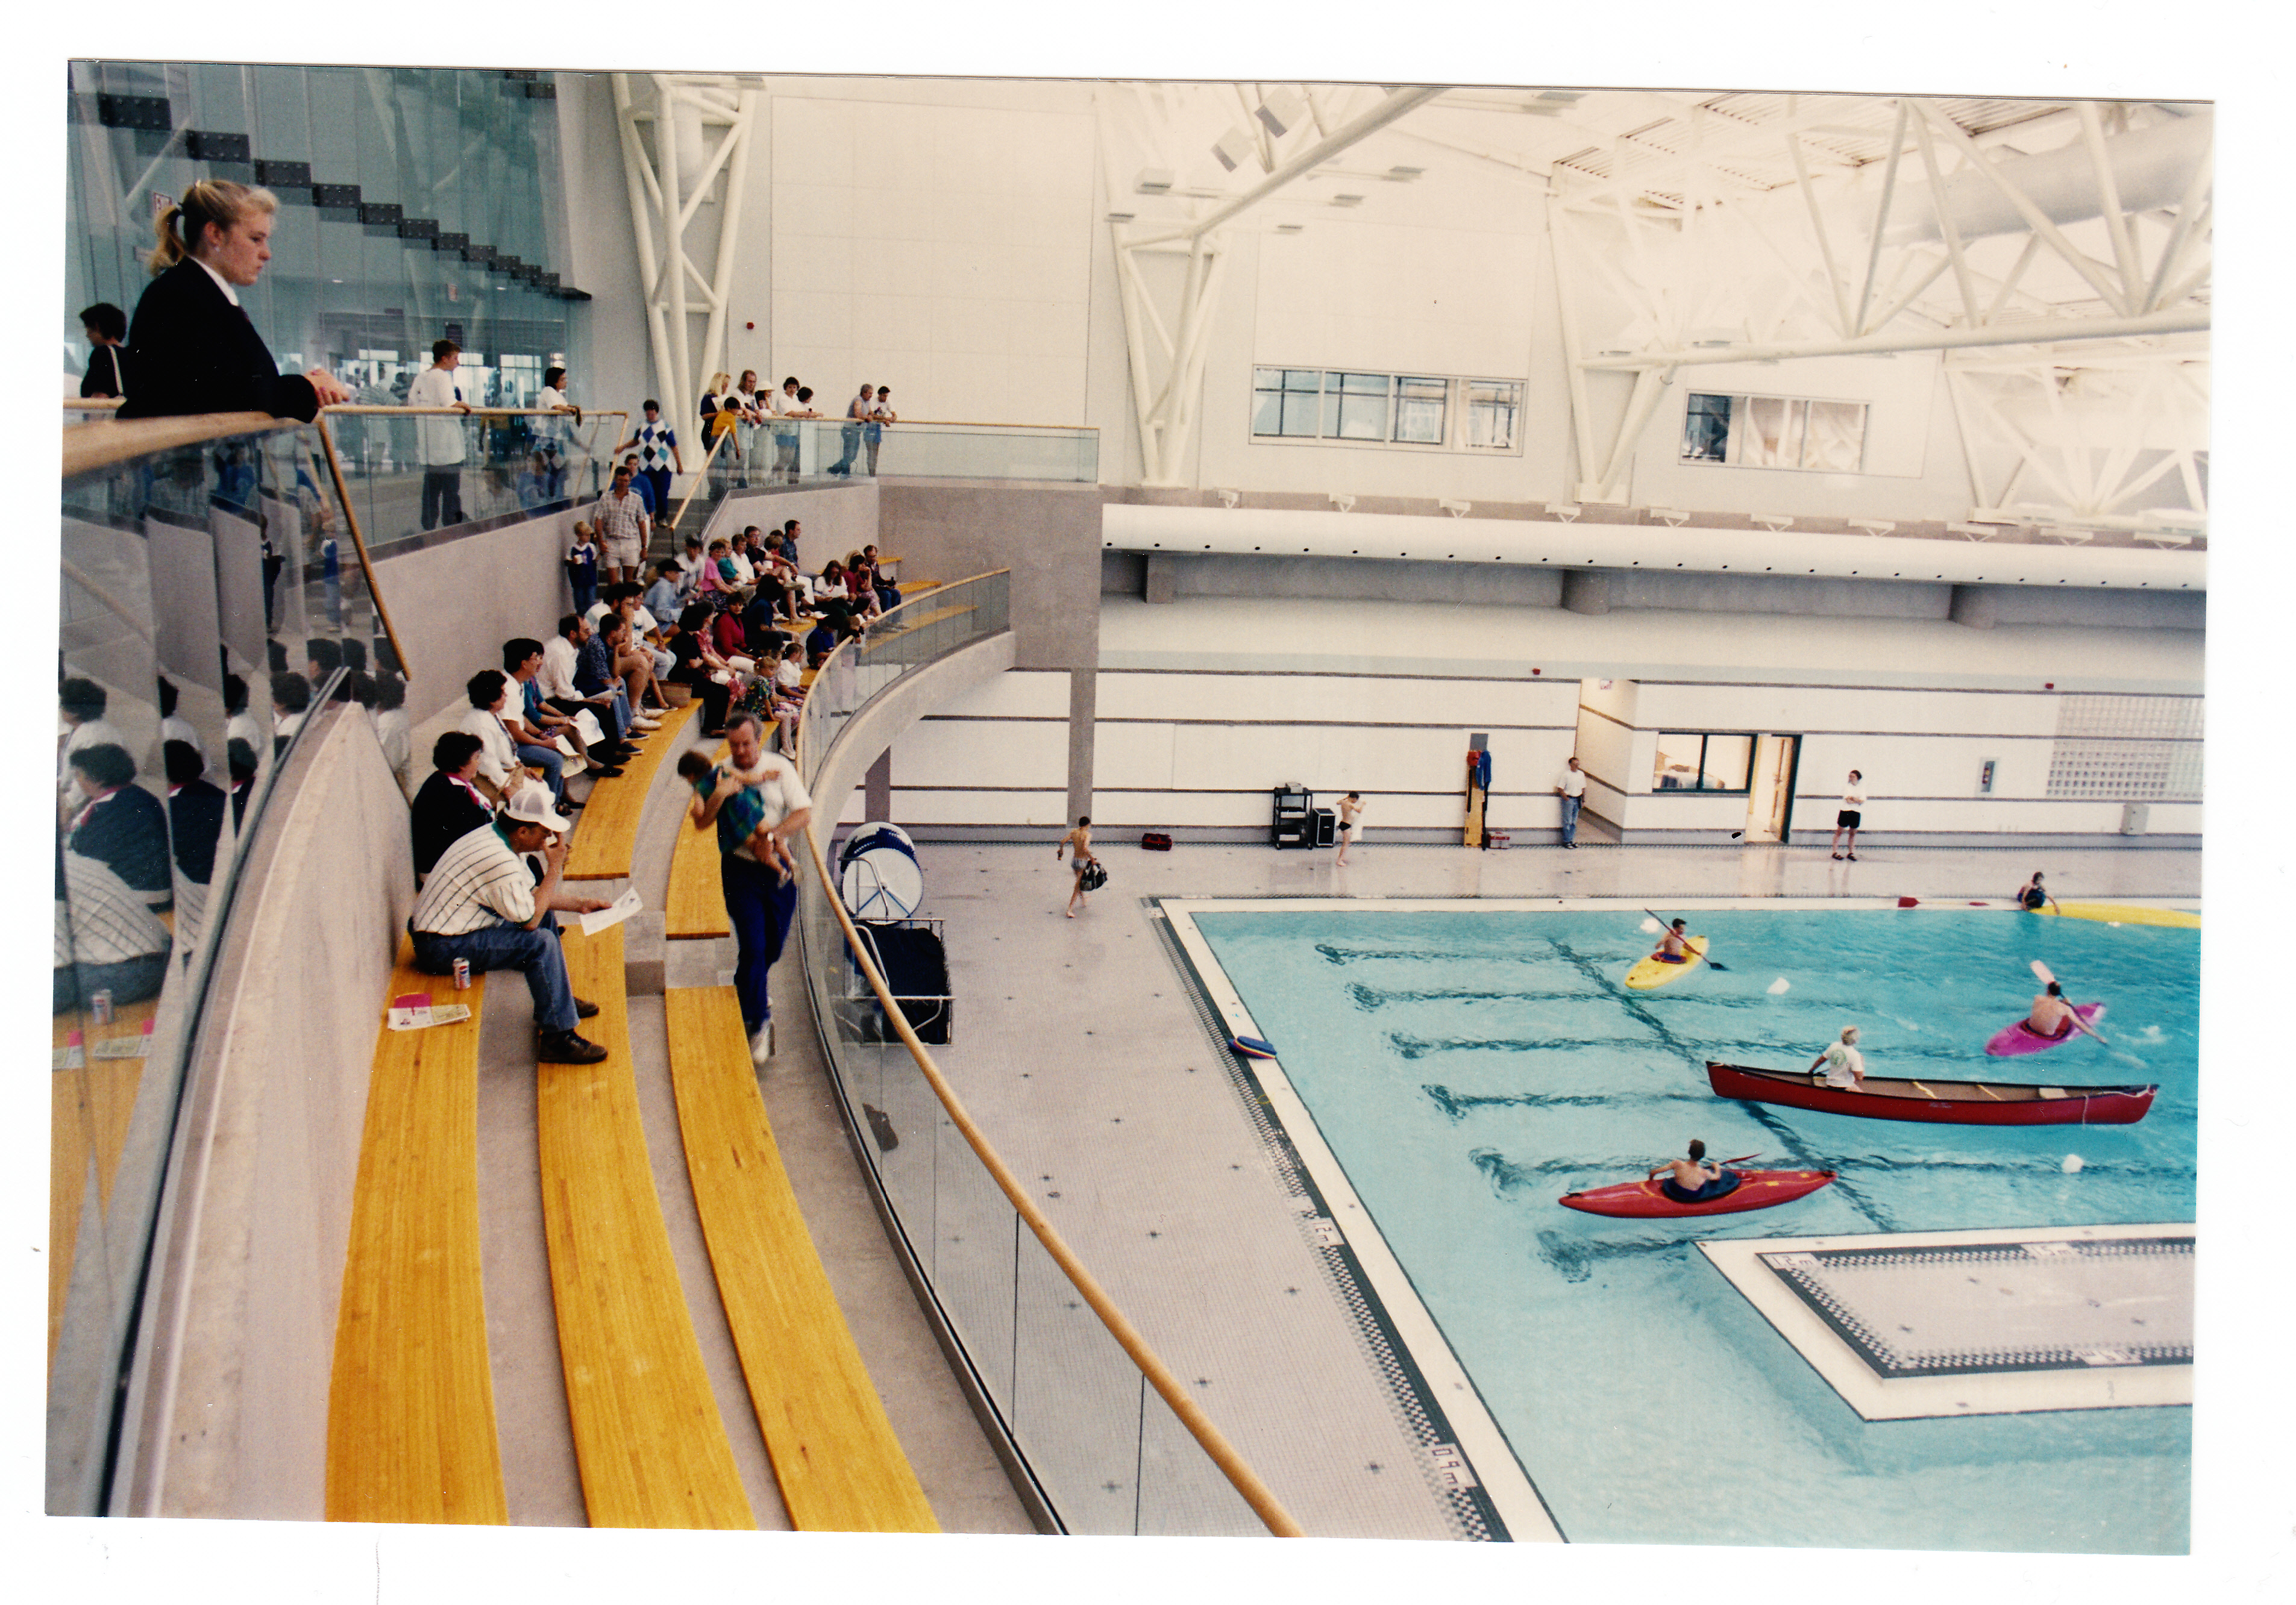 An old photograph of the opening day of the Sport and Wellness Centre. The photo is taken from the bleachers overlooking the pool. Many people are sitting in the bleachers while a few people are paddling in kayaks and canoes in the pool.